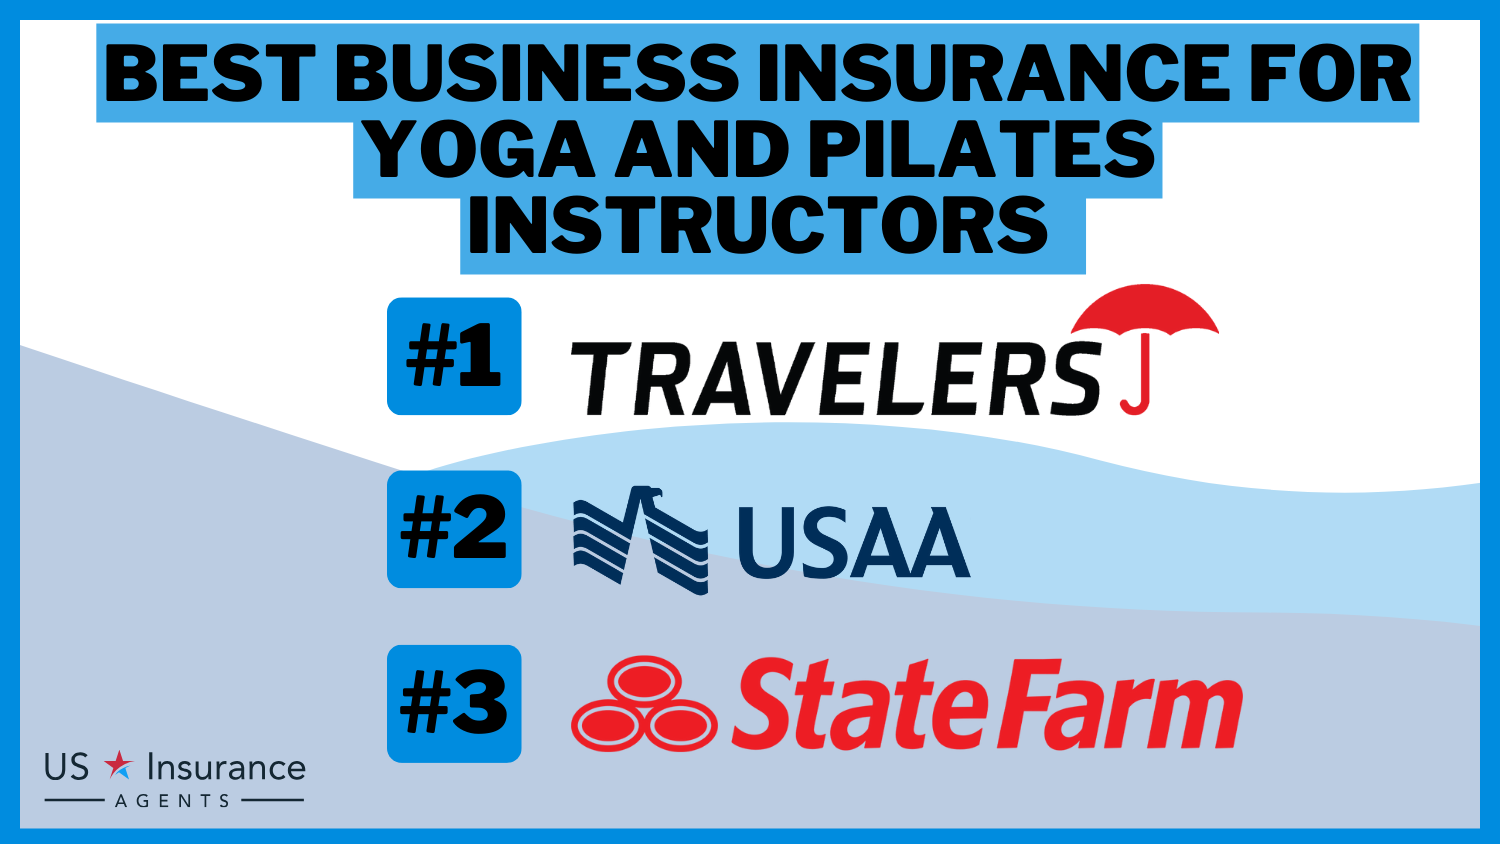 Best Business Insurance for Yoga and Pilates Instructors: Travelers, USAA and State Farm